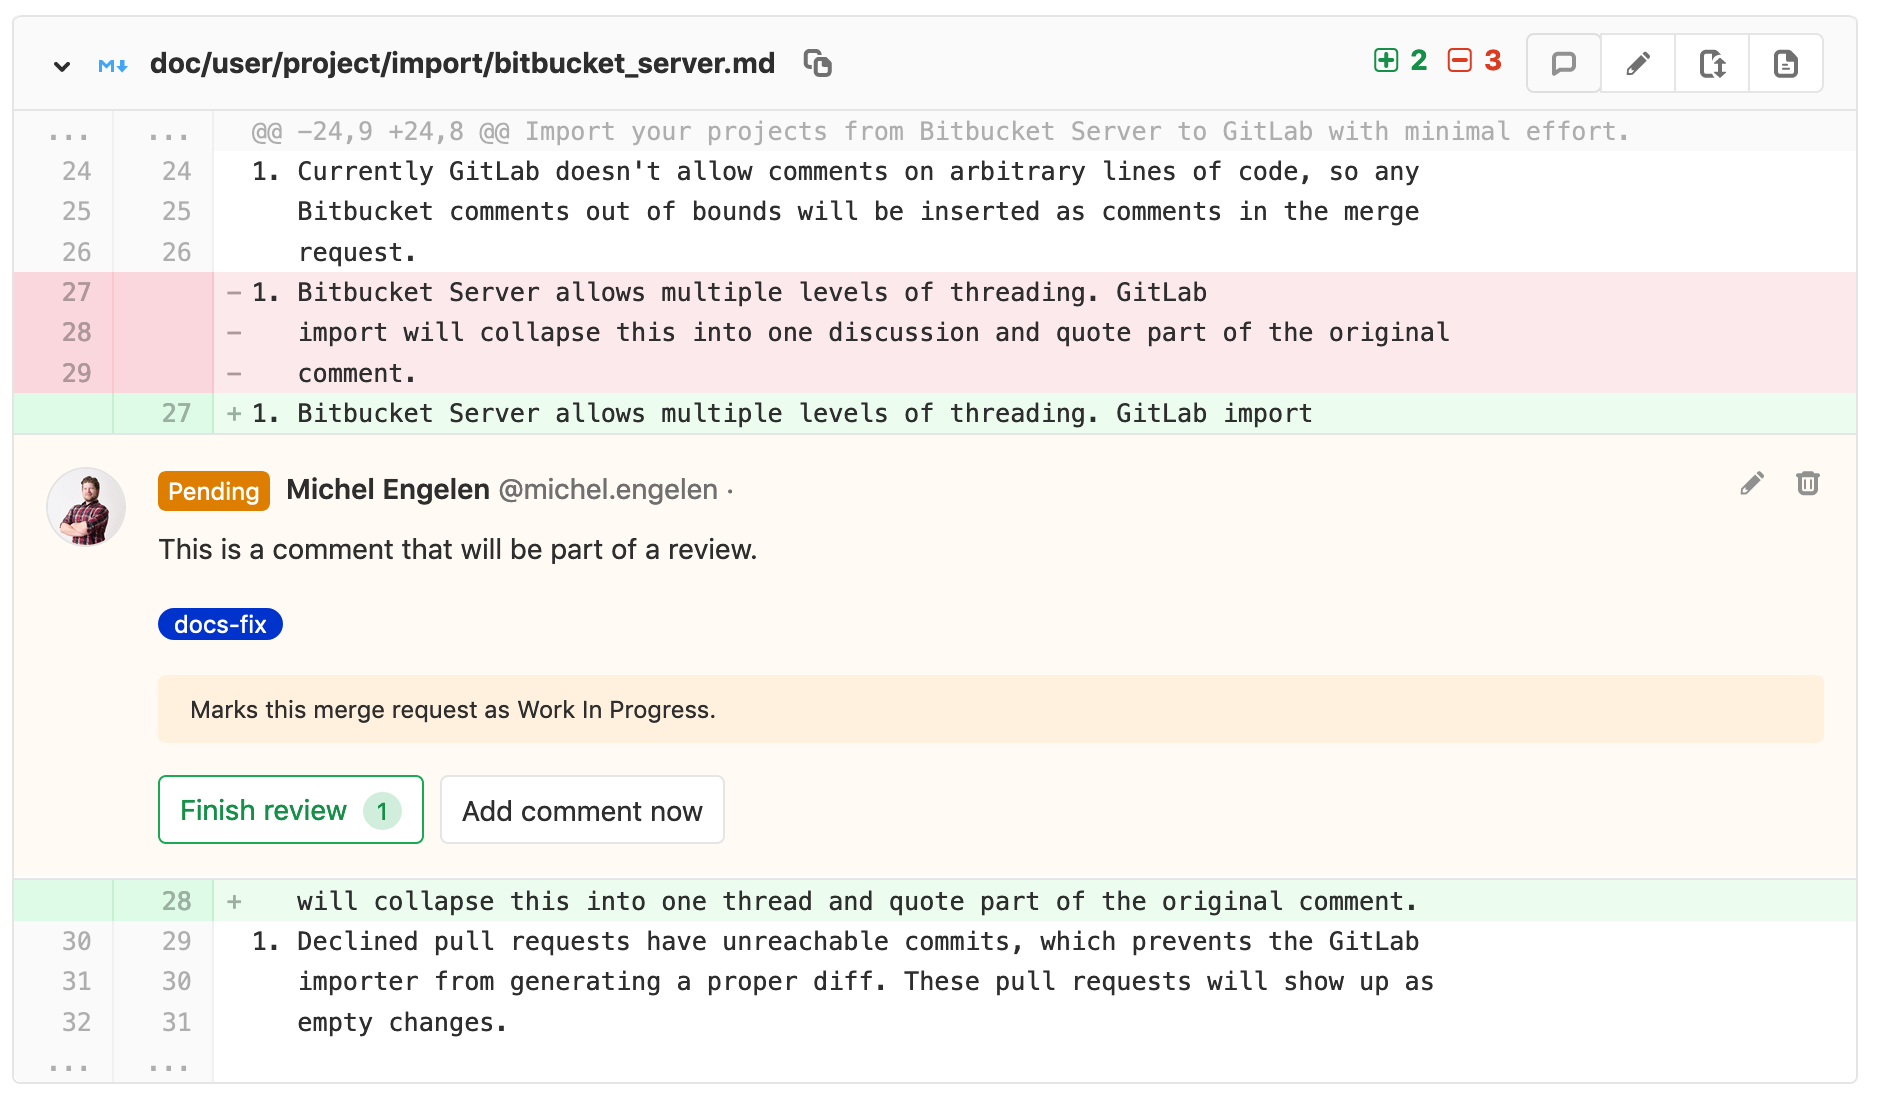 doc/user/discussions/img/review_comment_quickactions.png